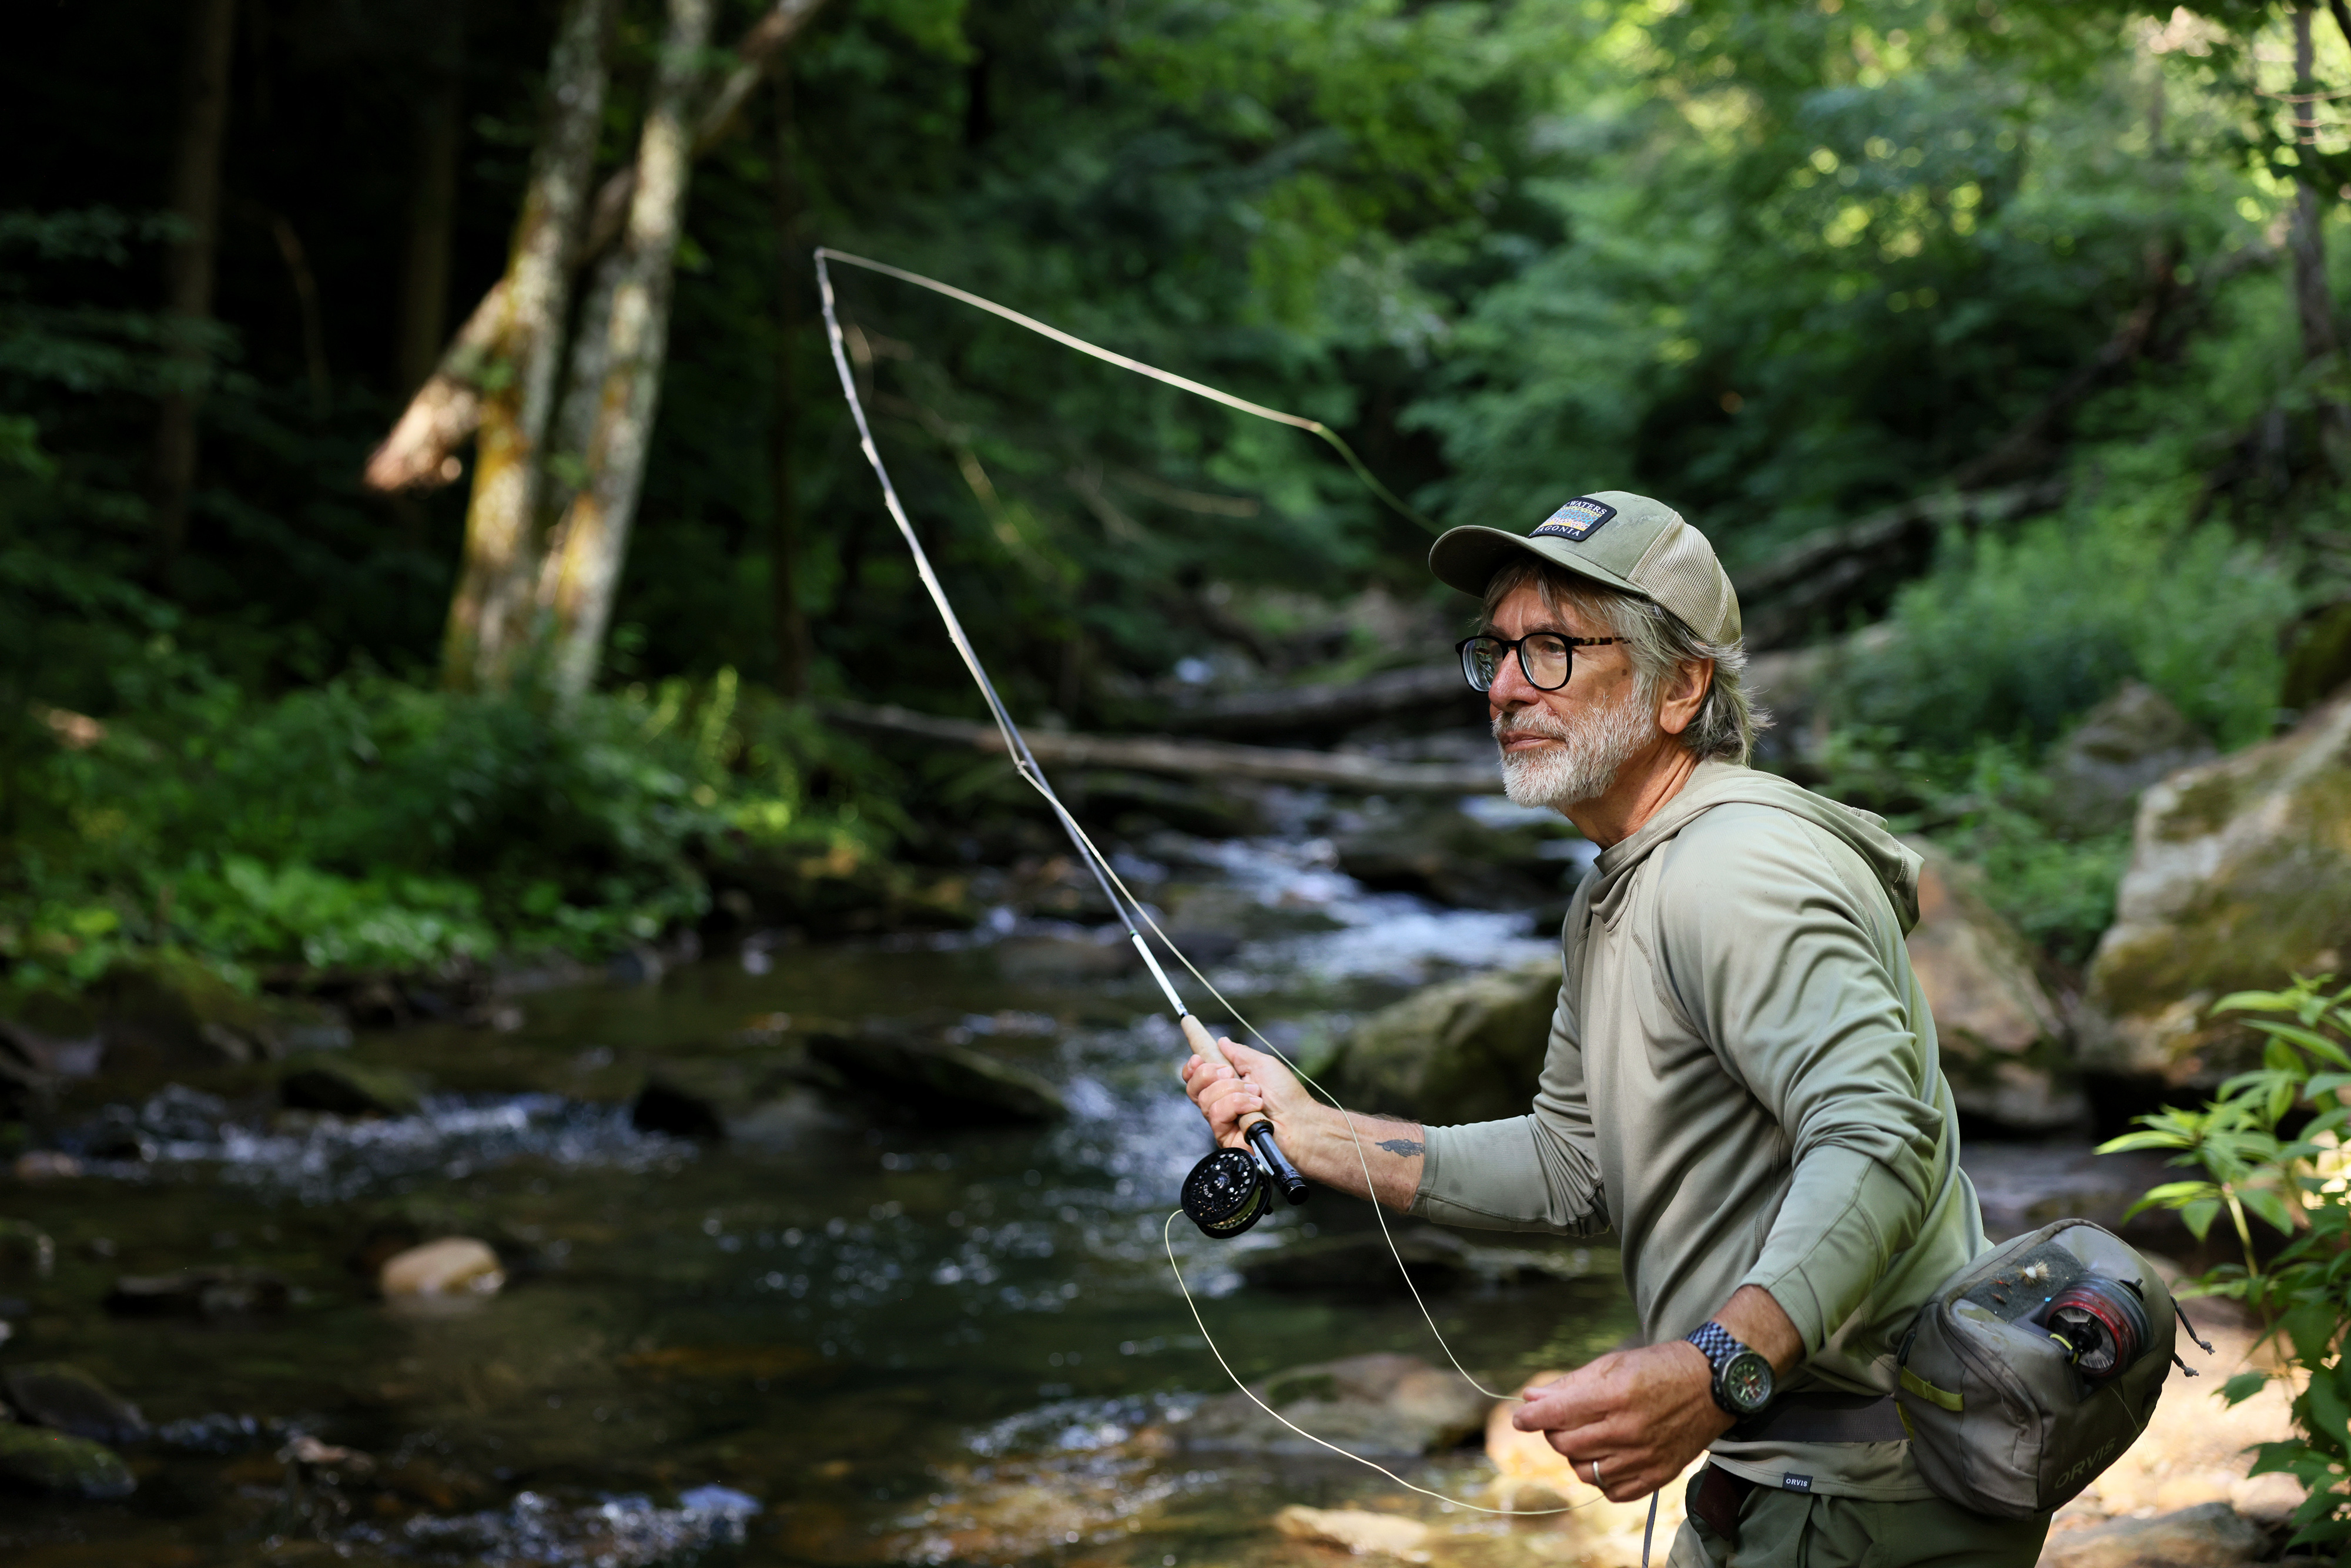 The Paris Review - The Philosophy of Fly-Fishing